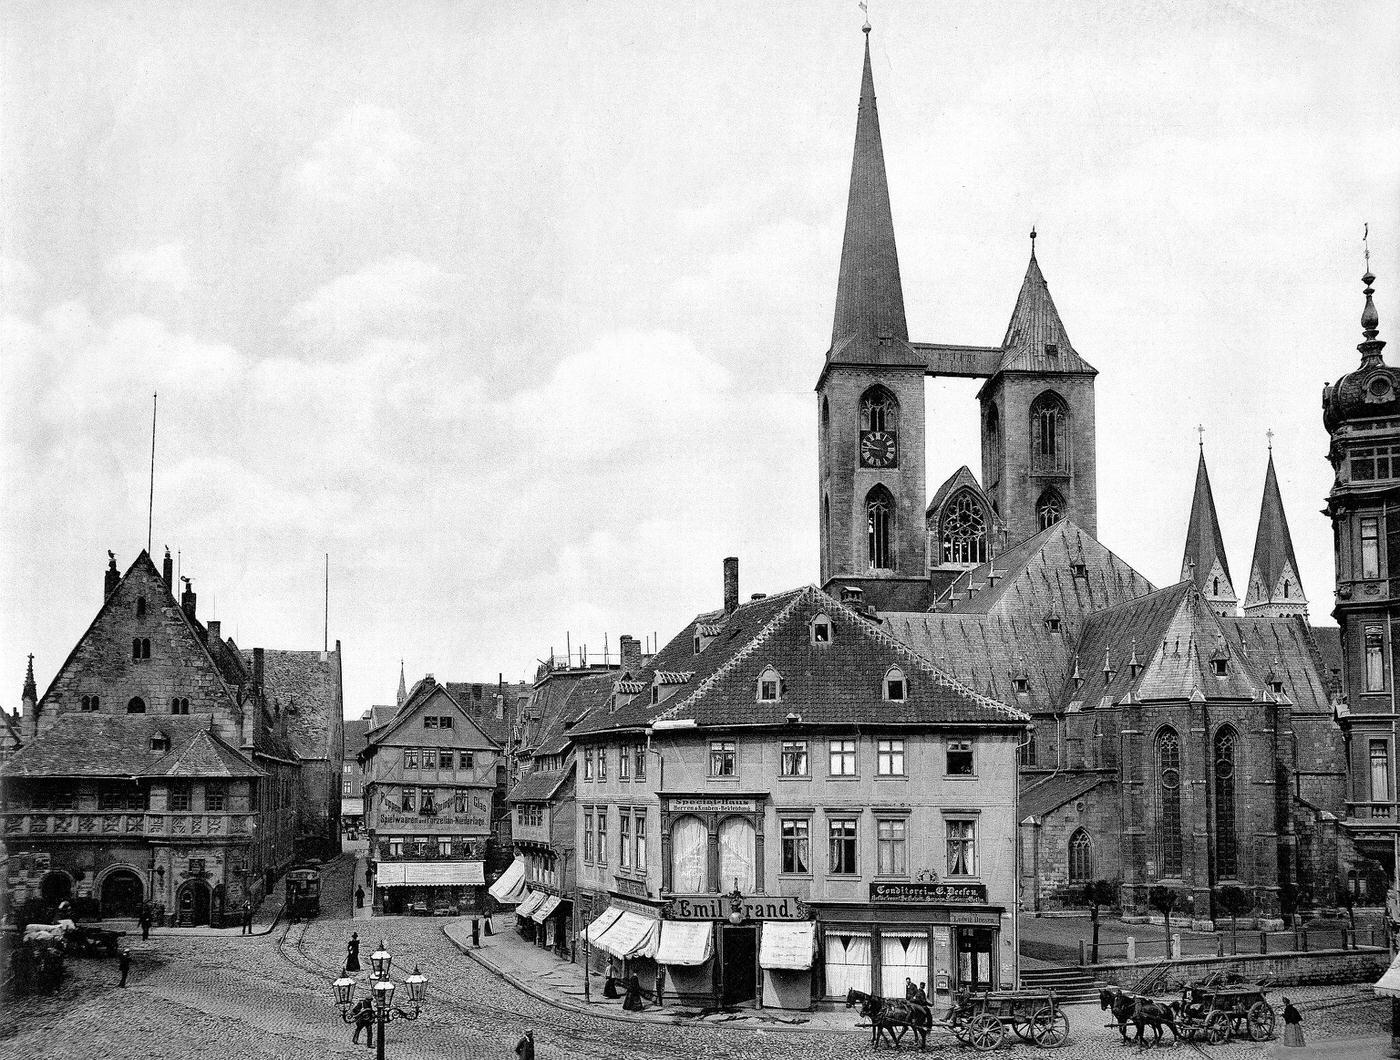 Fish Market and the Martini church, Halberstadt, Saxony province, Germany, 1898